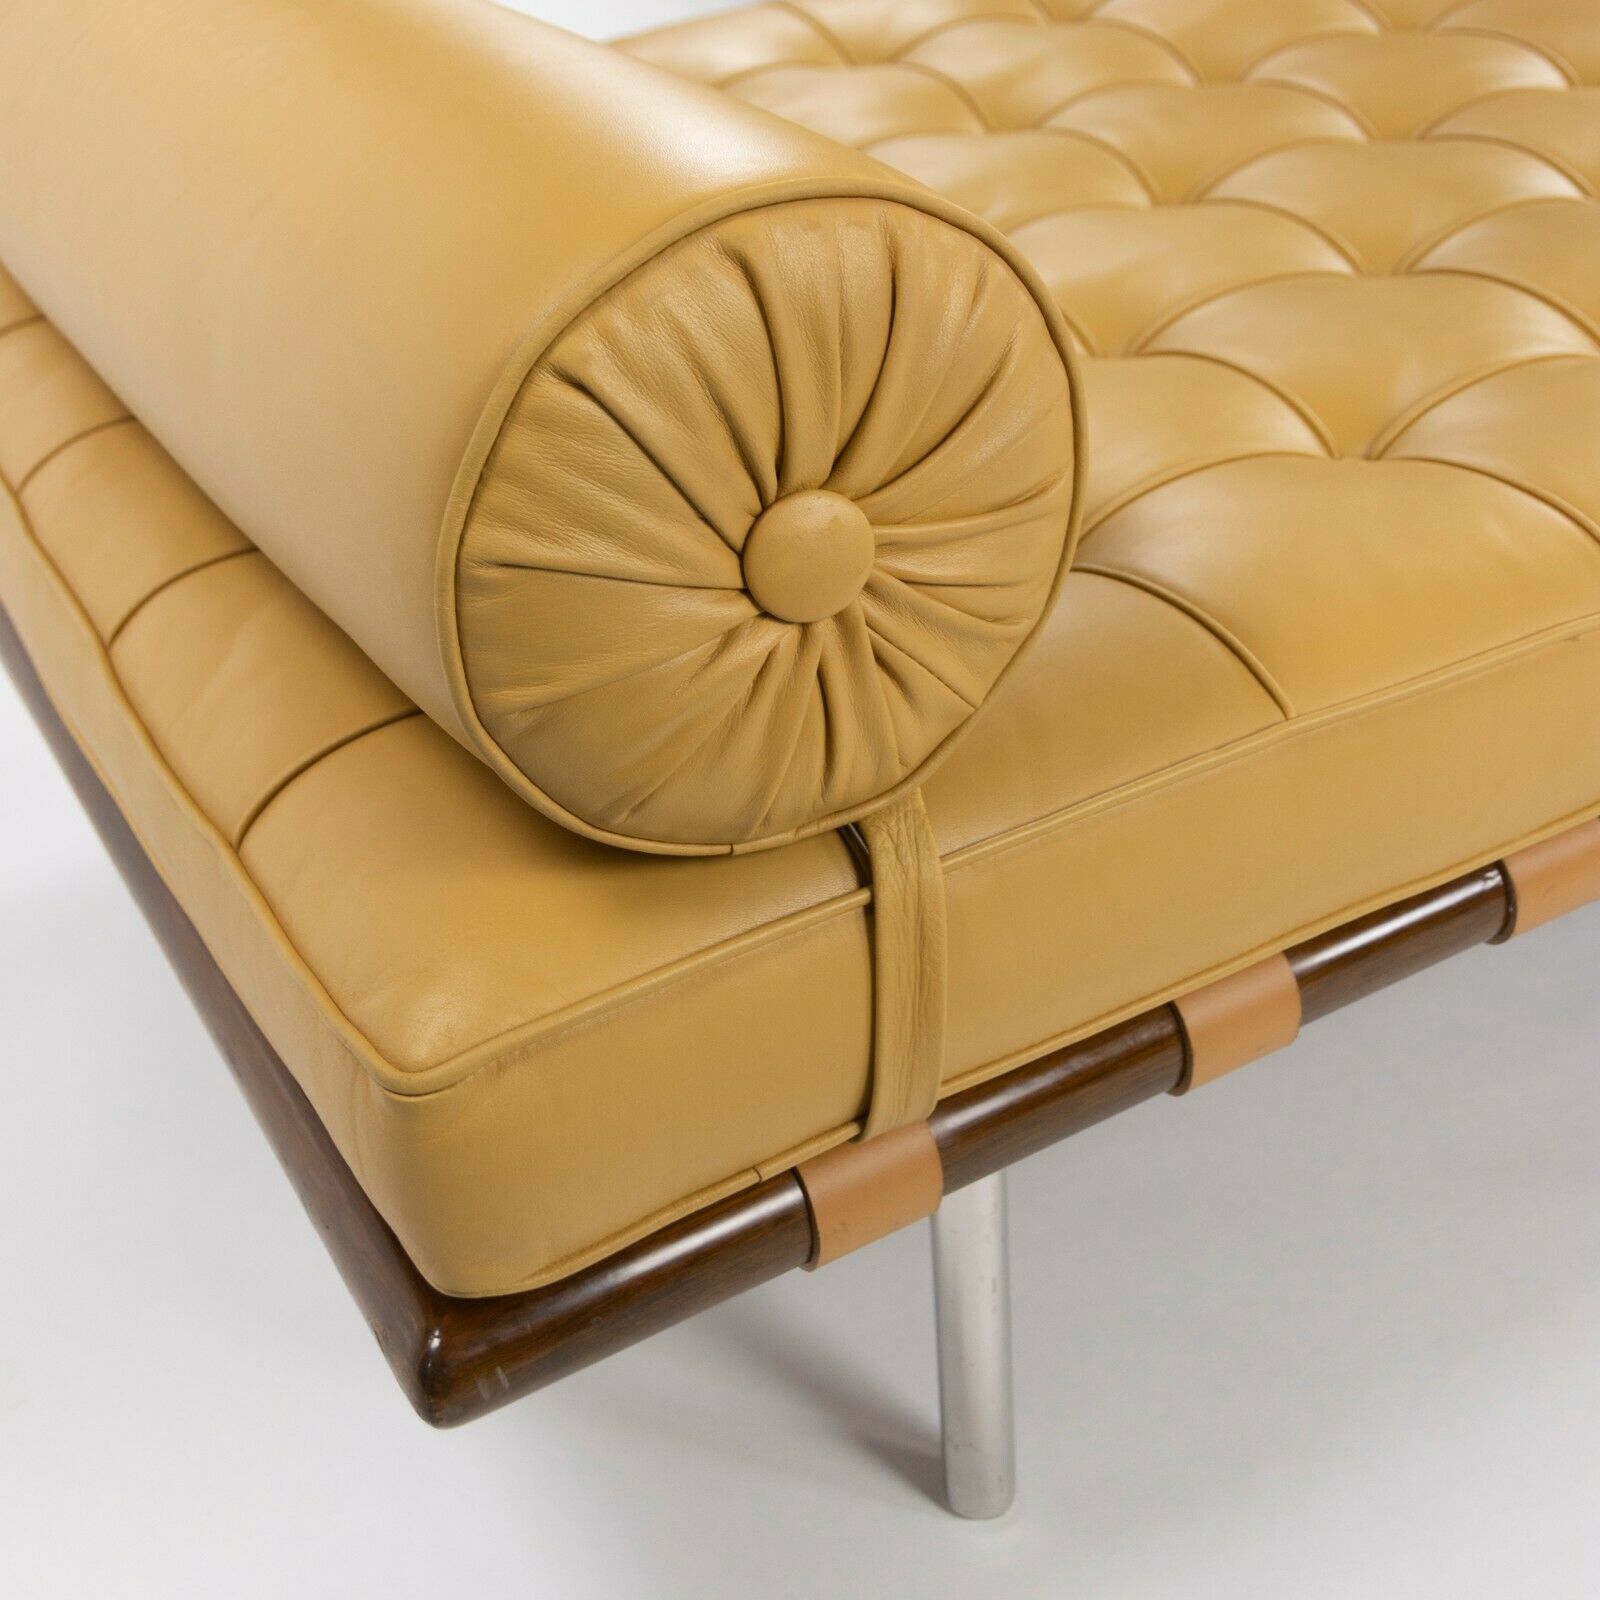 SOLD 1970s Mies Van Der Rohe for Knoll Barcelona Day Bed / Couch in Tan Leather Signed